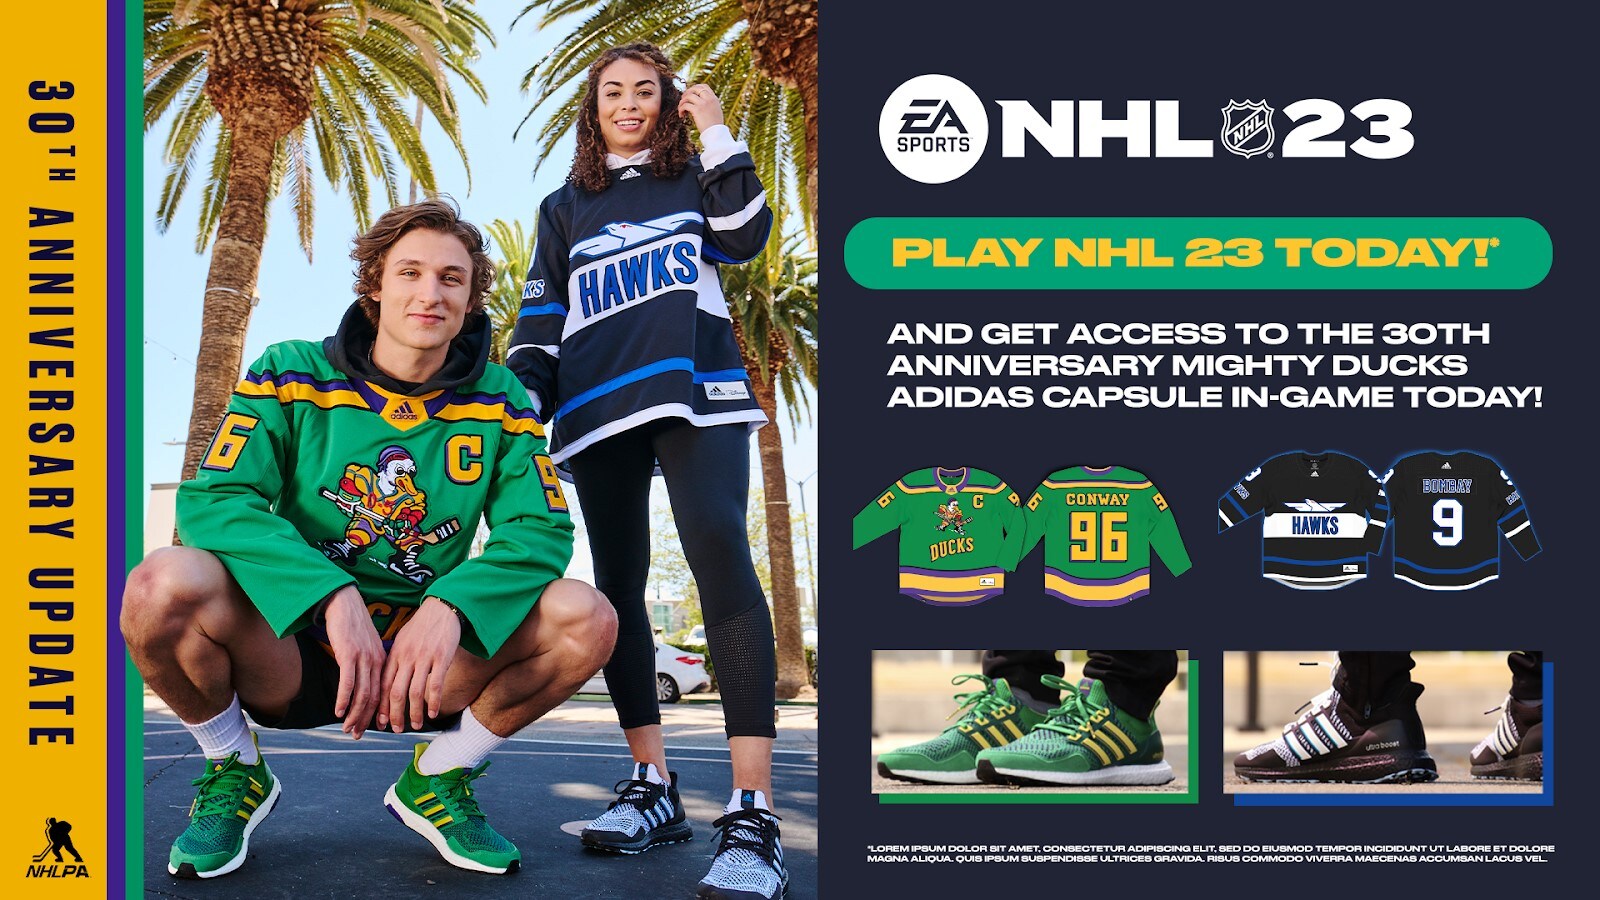 Electronic Arts - NHL 23 - Mighty Ducks Campaign